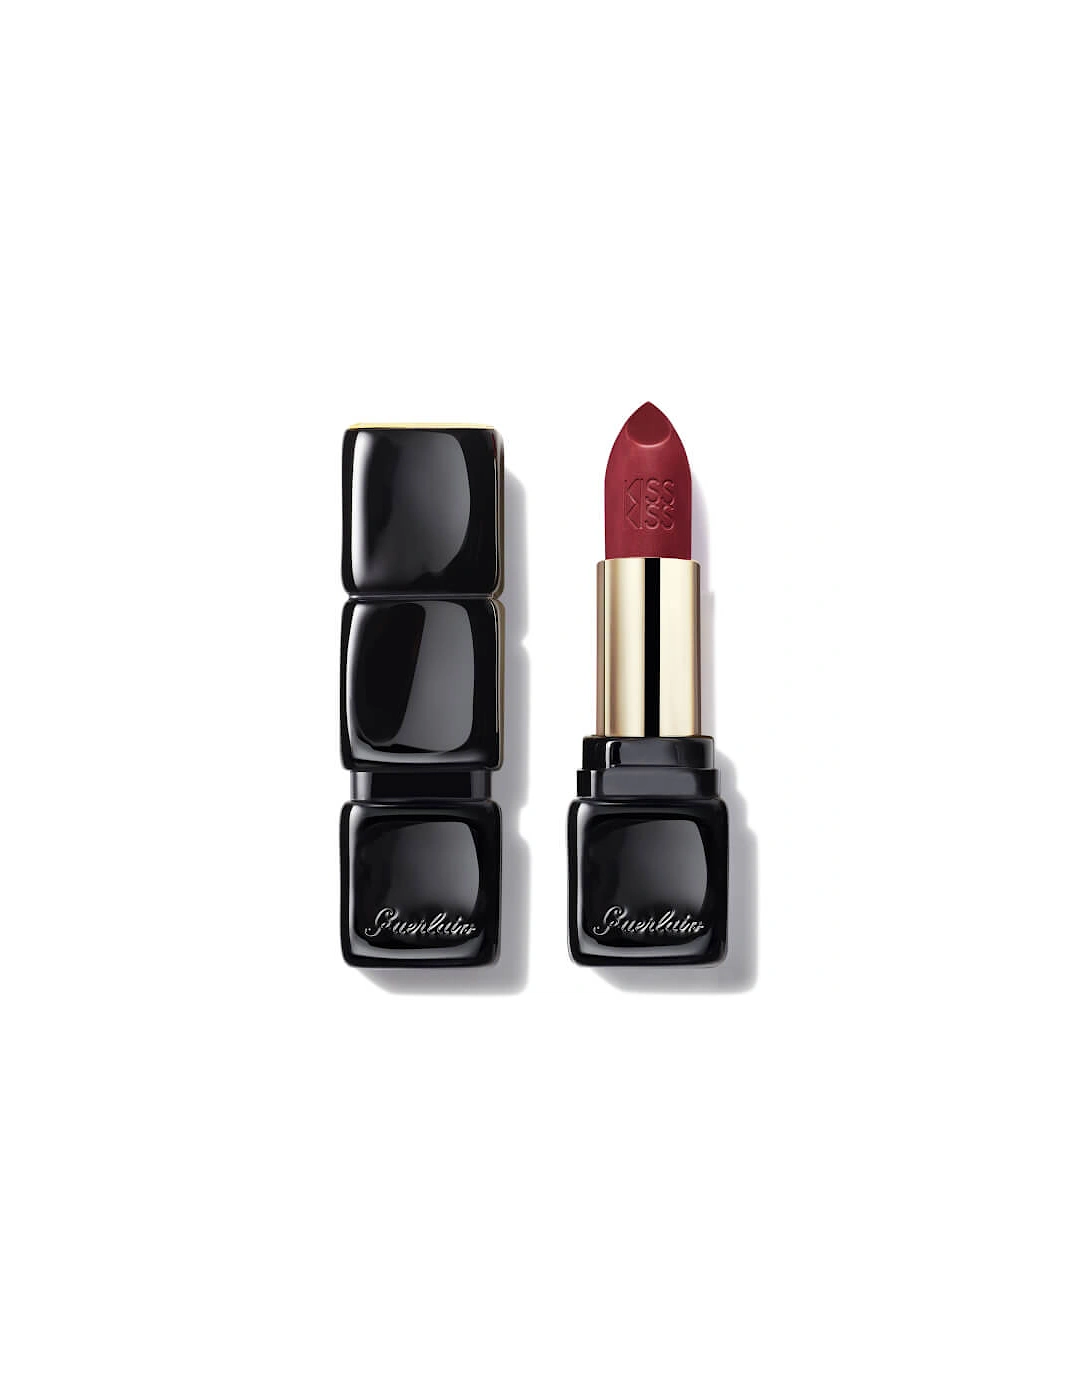 Kisskiss Shaping Cream Lip Colour - 321 Red Passion, 2 of 1